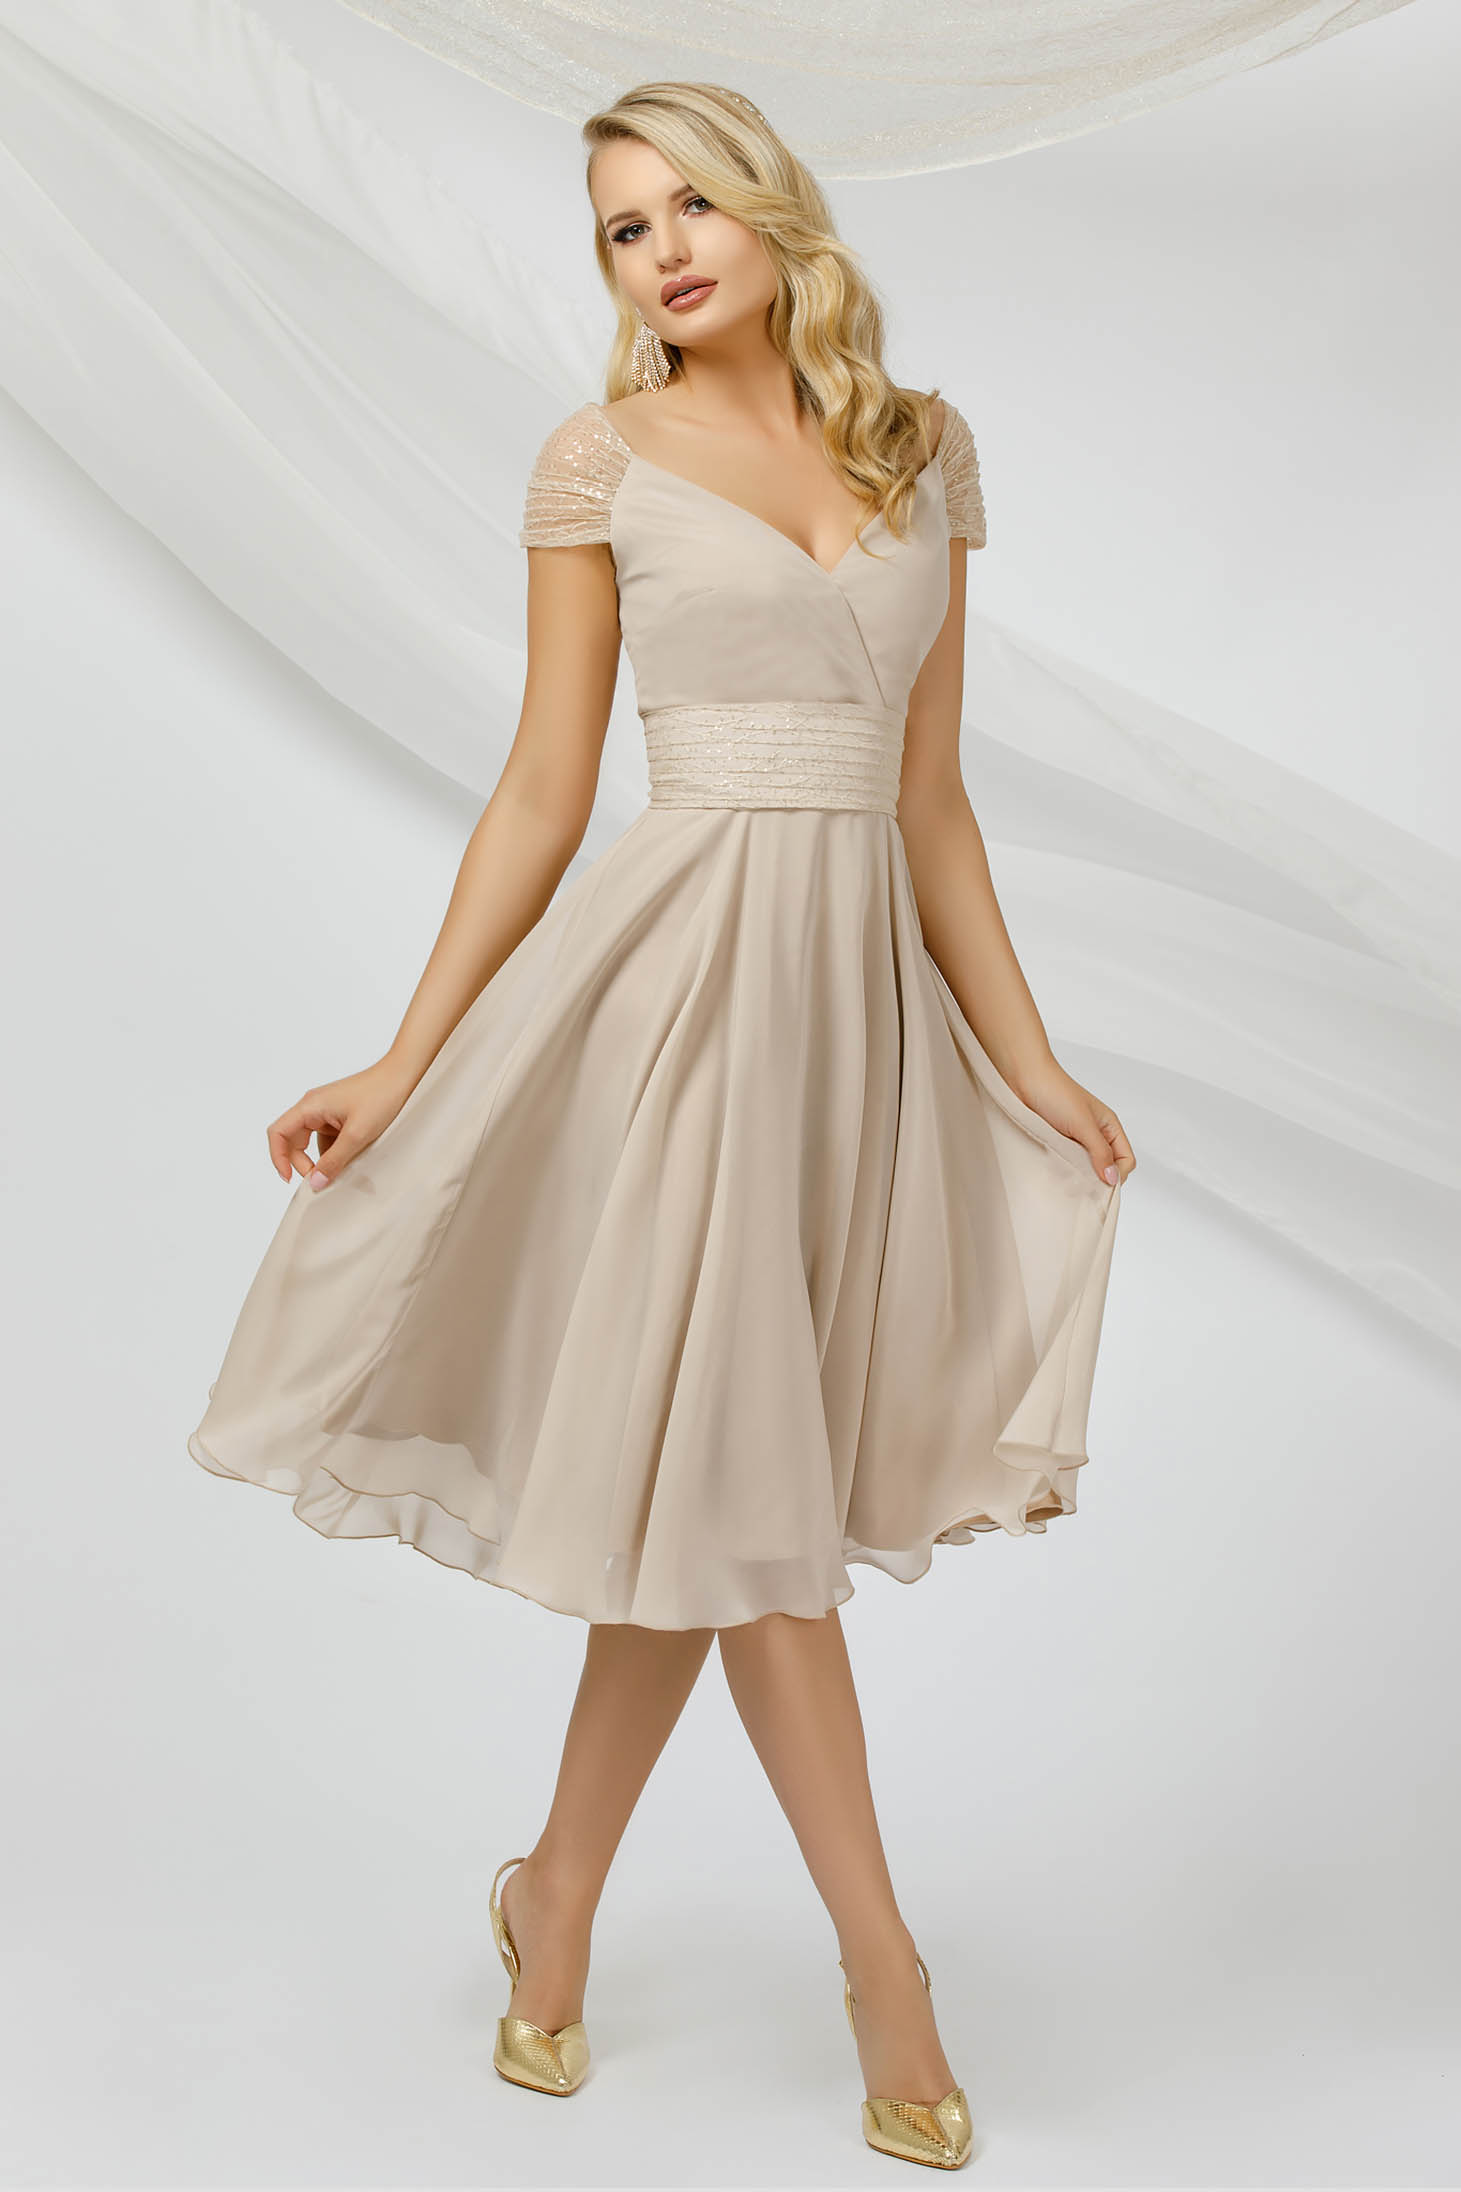 Cream dress occasional thin fabric from veil fabric with sequin embellished details midi